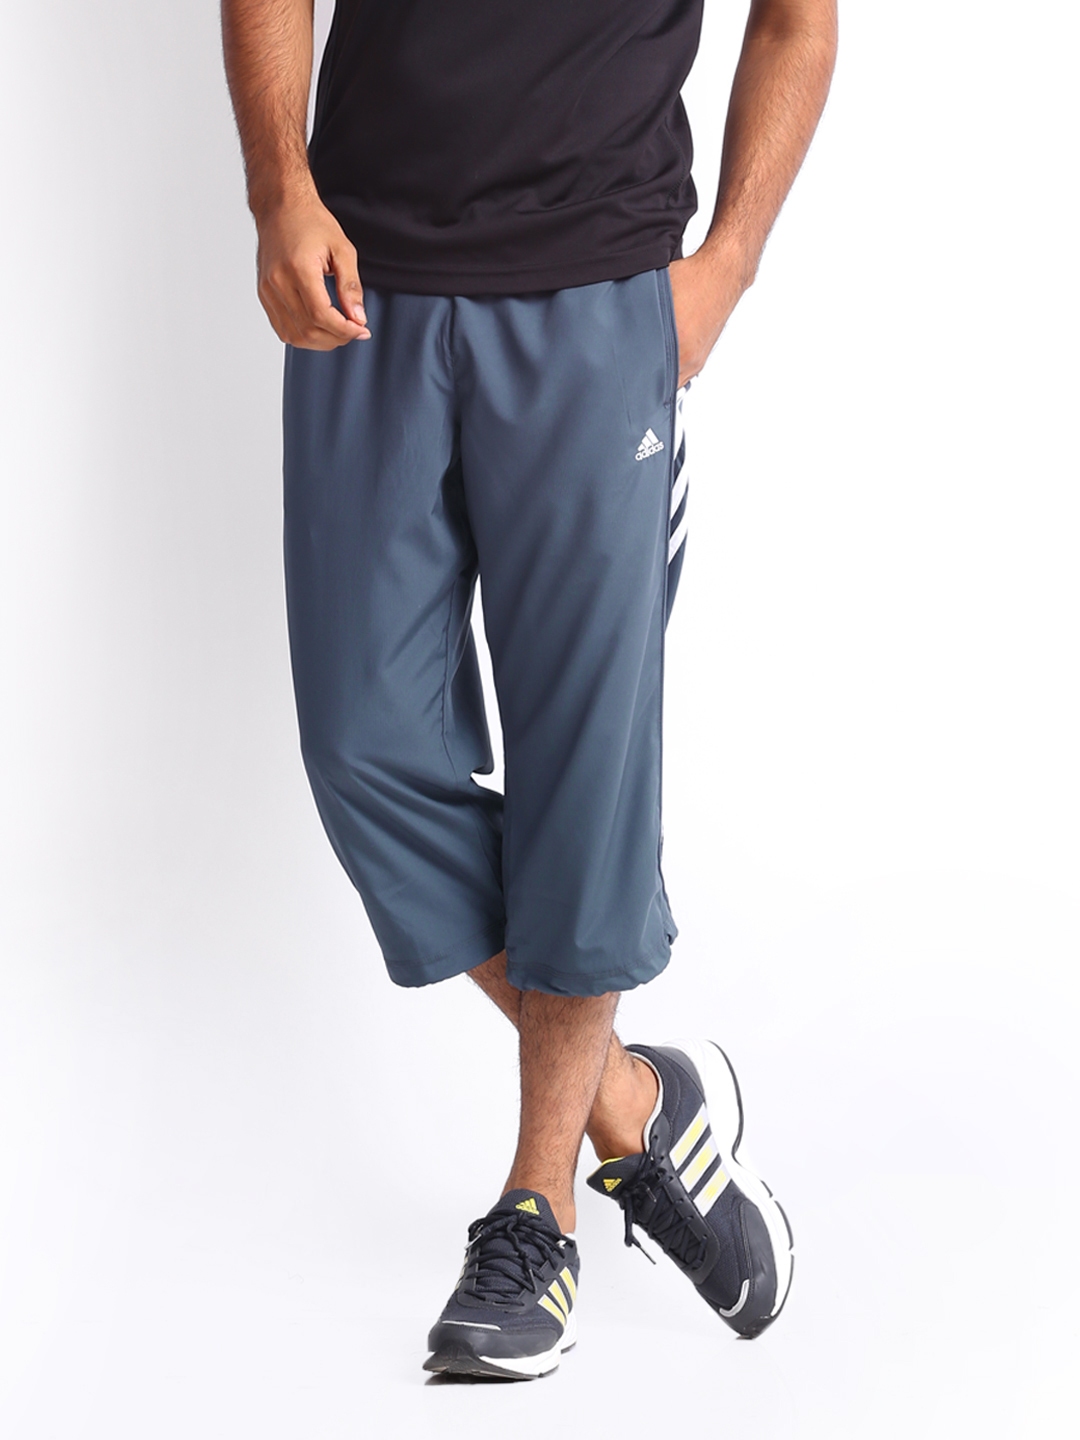 Buy 34 Track Pants Online  199 from ShopClues